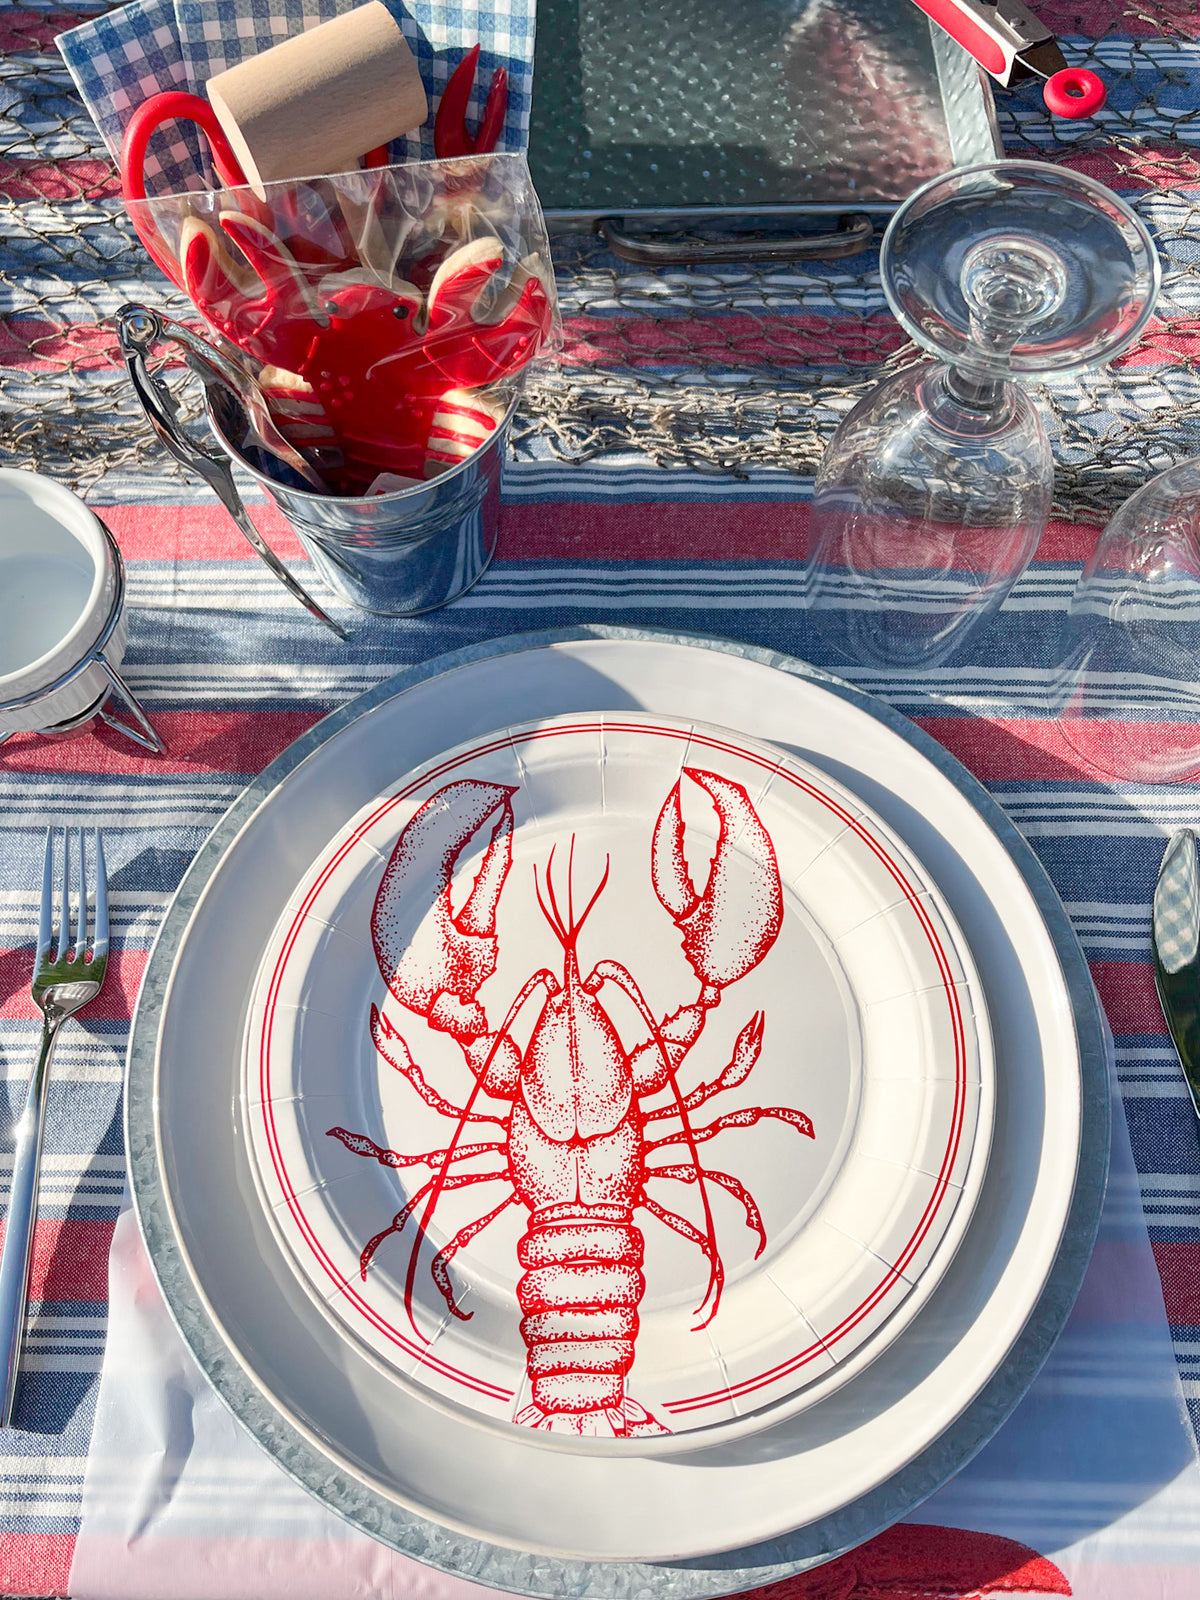 Crawfish Boil & Seafood Party Supplies - Crawfish Paper Dinner Plates and  Napkins for Mardi Gras and Seafood Festivals (Serves 16)